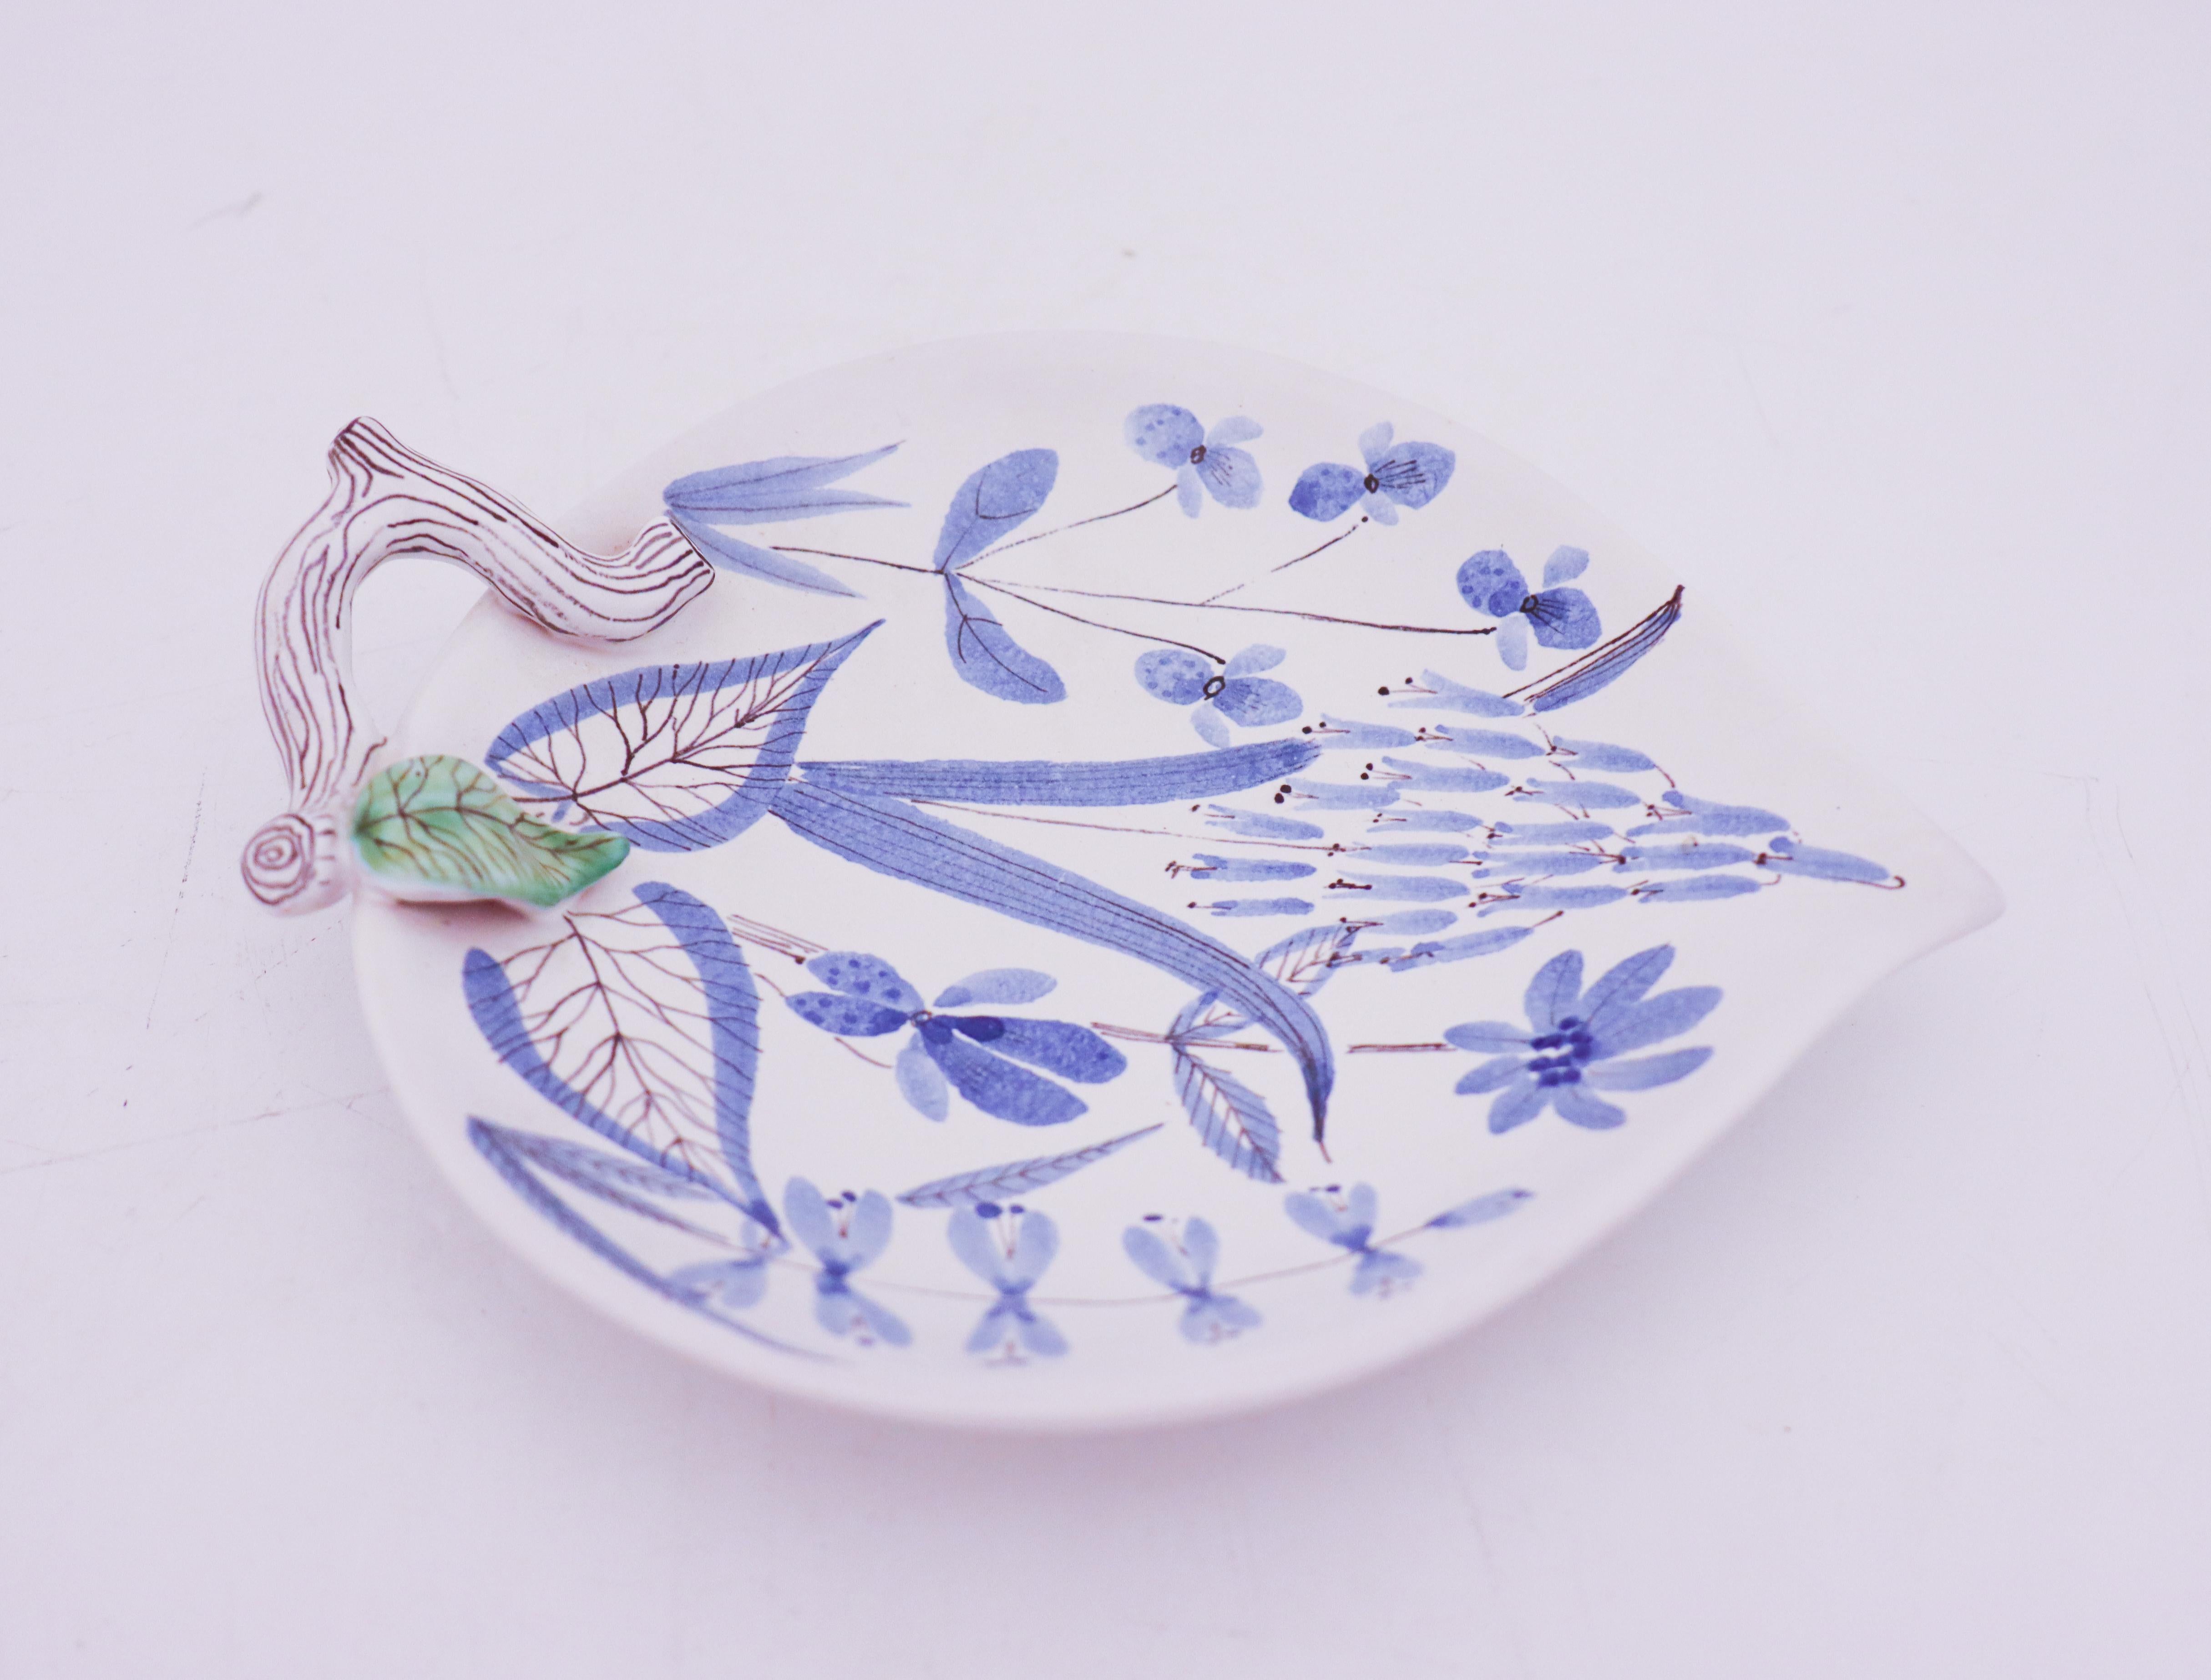 Leaf Shaped Serving Dish Faience, Stig Lindberg, Gustavsbergs Studio In Good Condition For Sale In Stockholm, SE